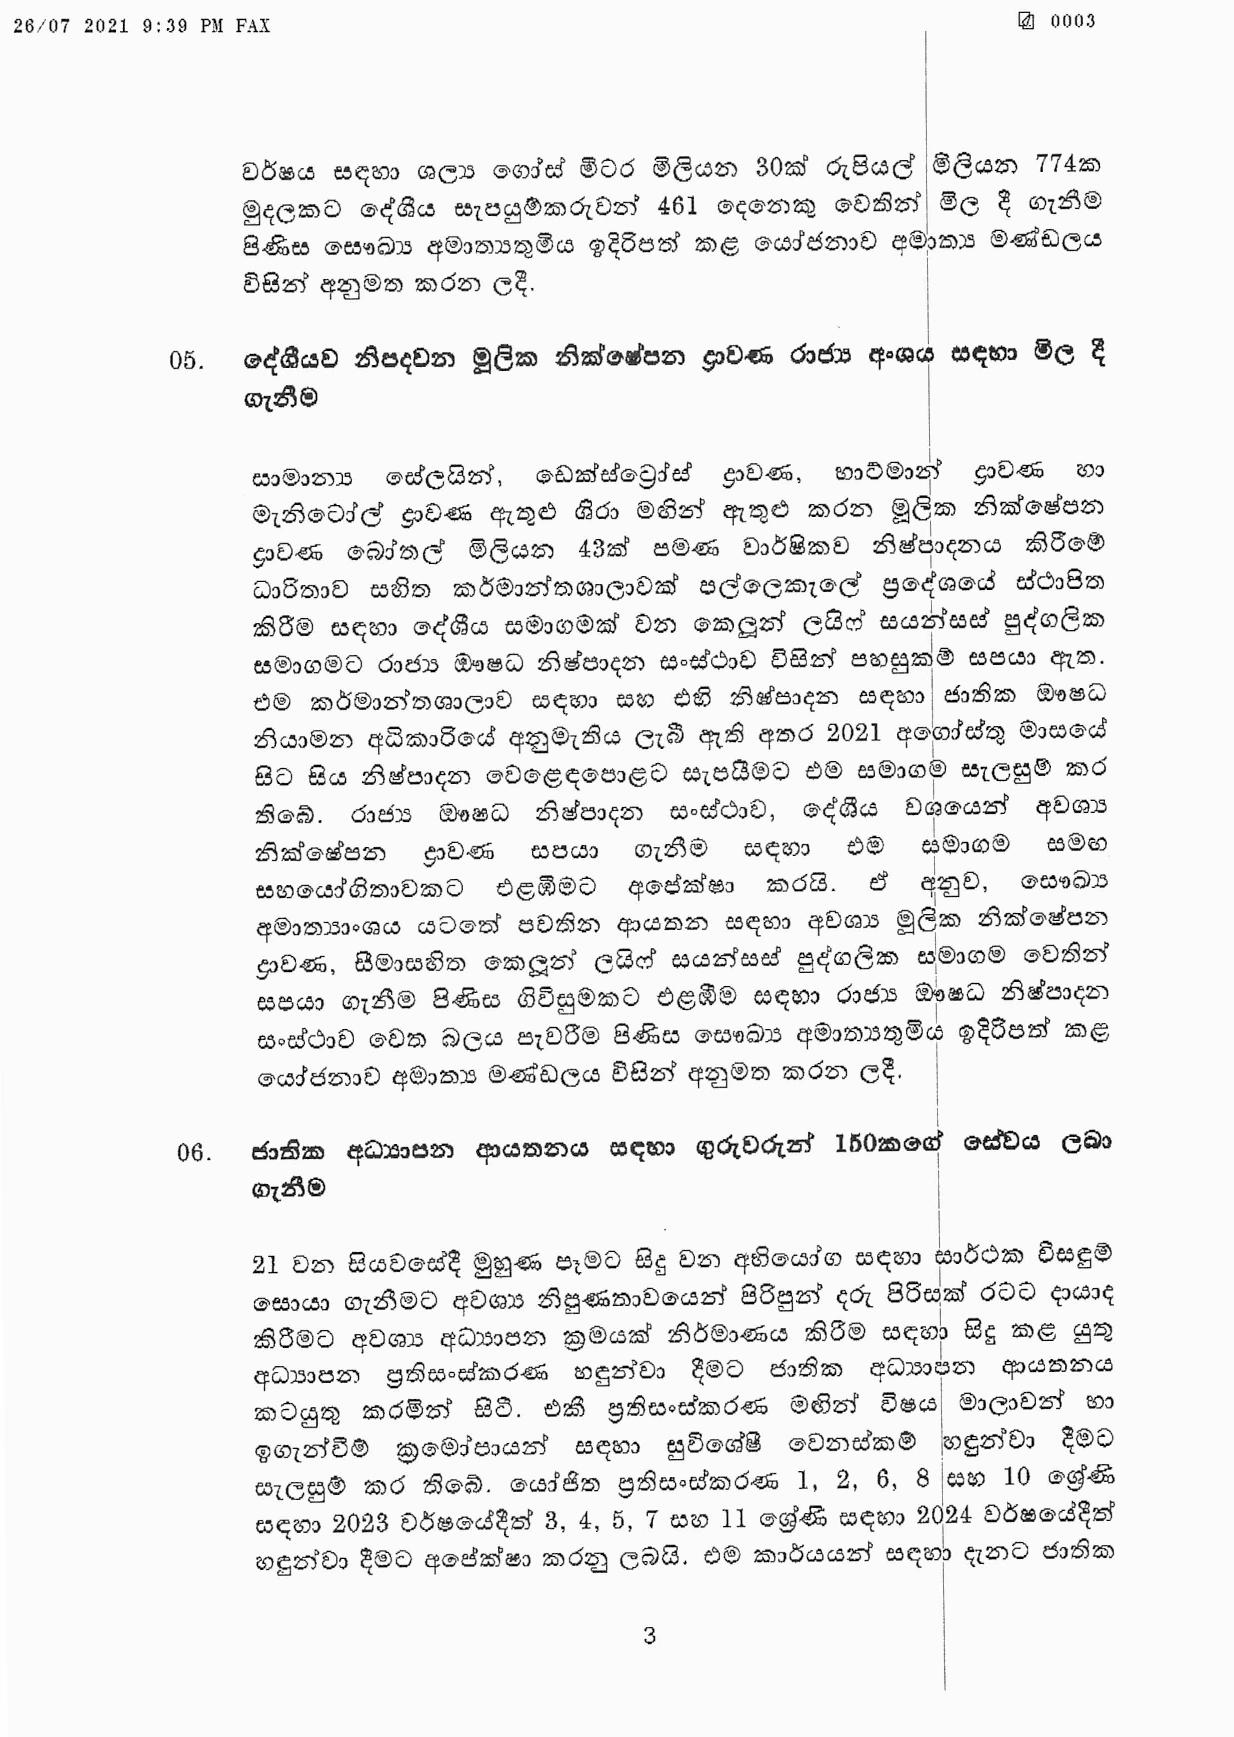 Cabinet Decision on 26.07.2021 page 003